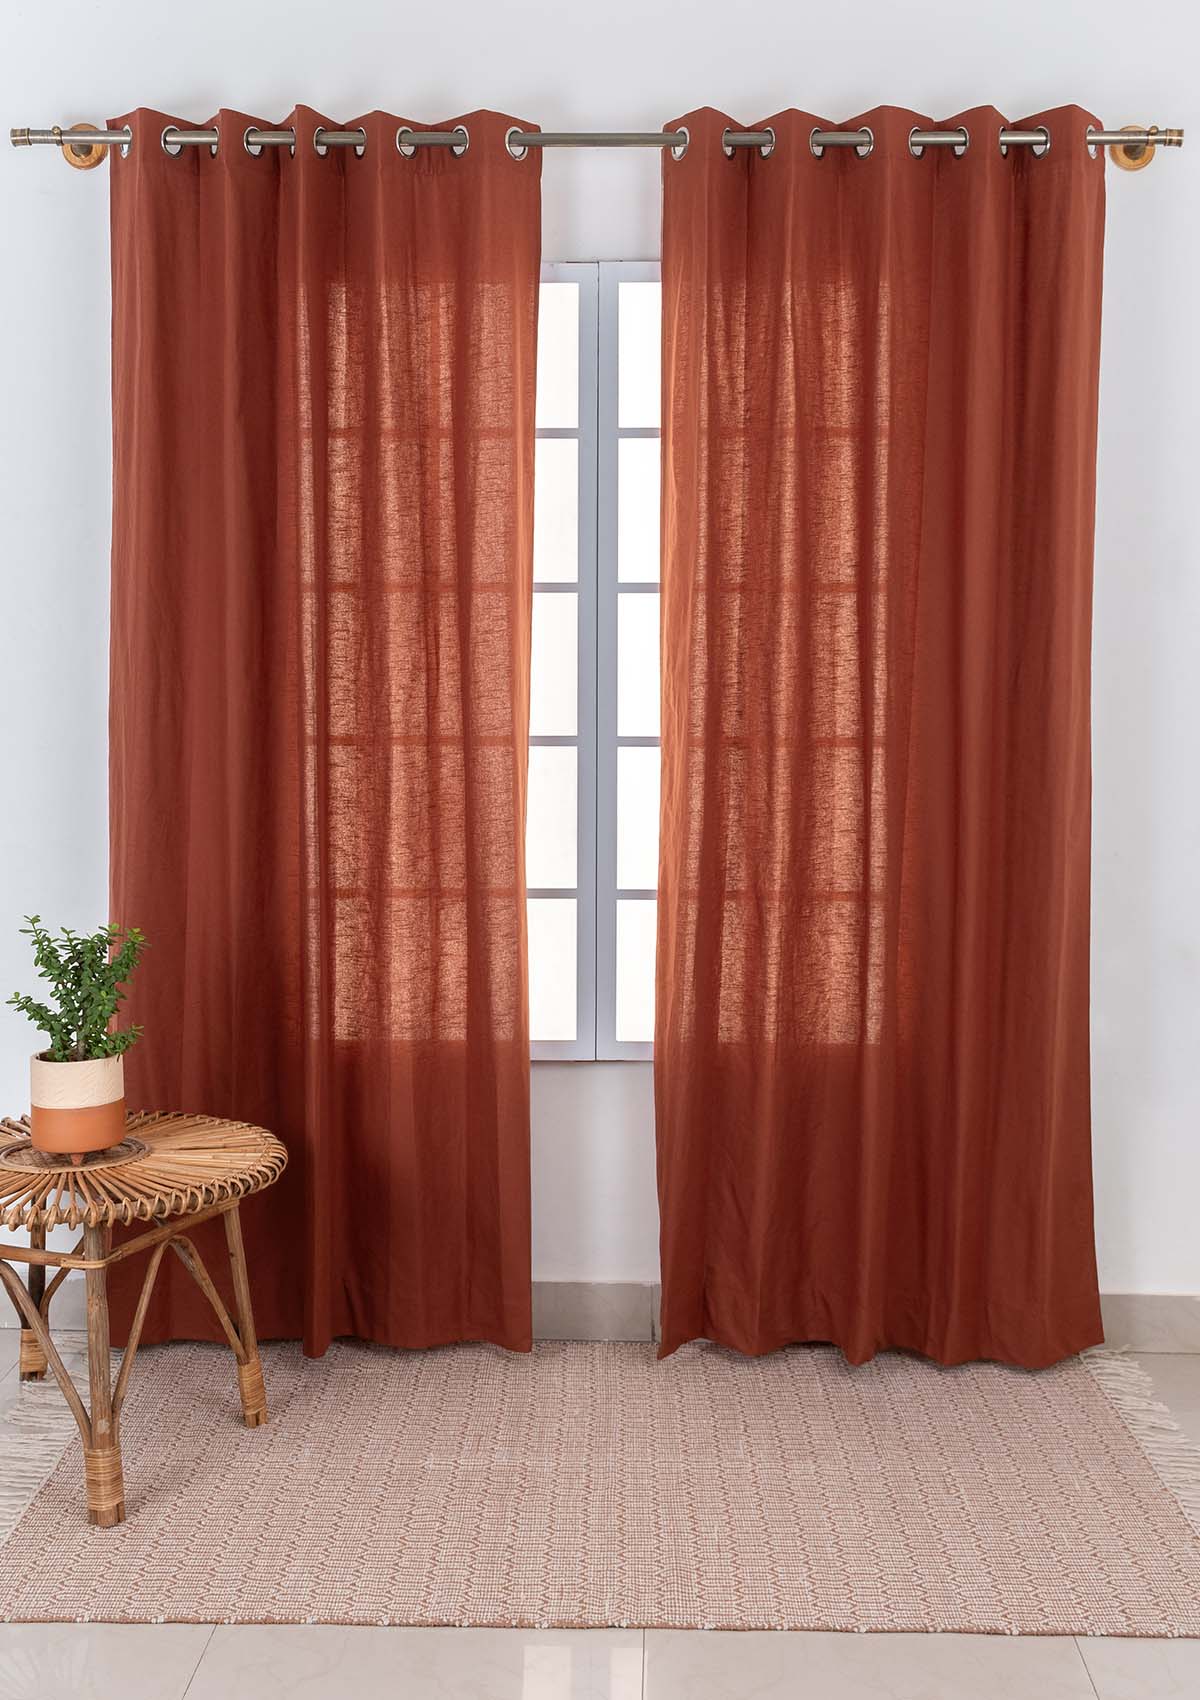 Solid Brick Red 100% cotton plain curtain for bedroom - Room darkening - Pack of 1